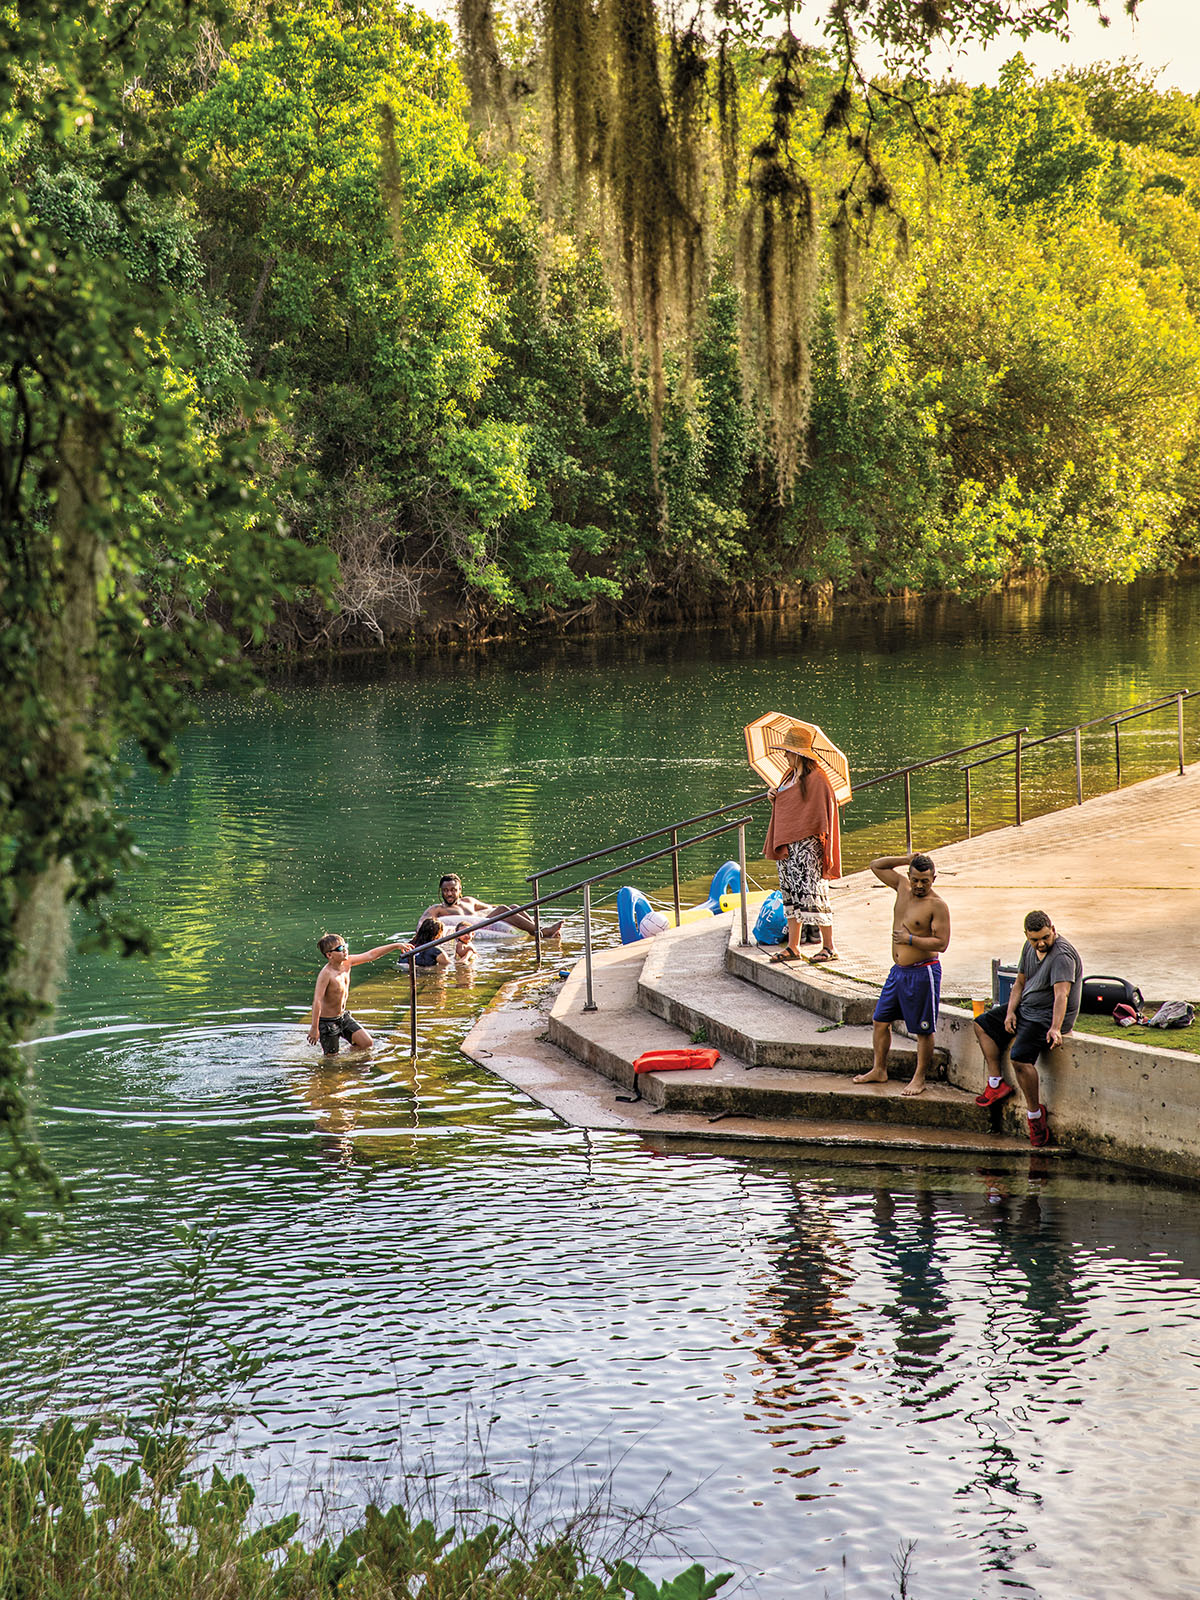 A small group of people sit on concrete steps and swim in a river scene under green trees